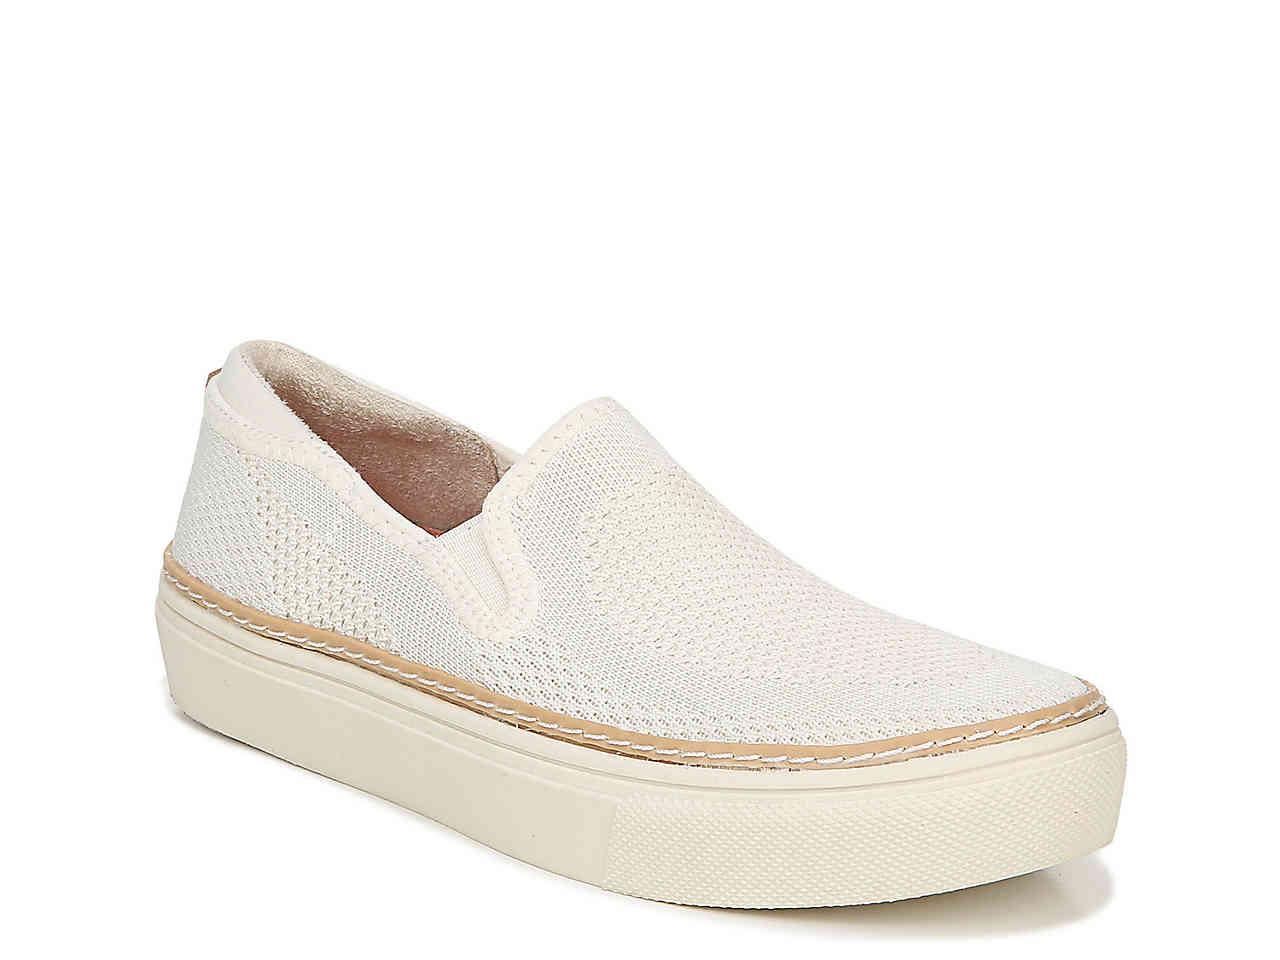 dr scholl's slip on sneakers